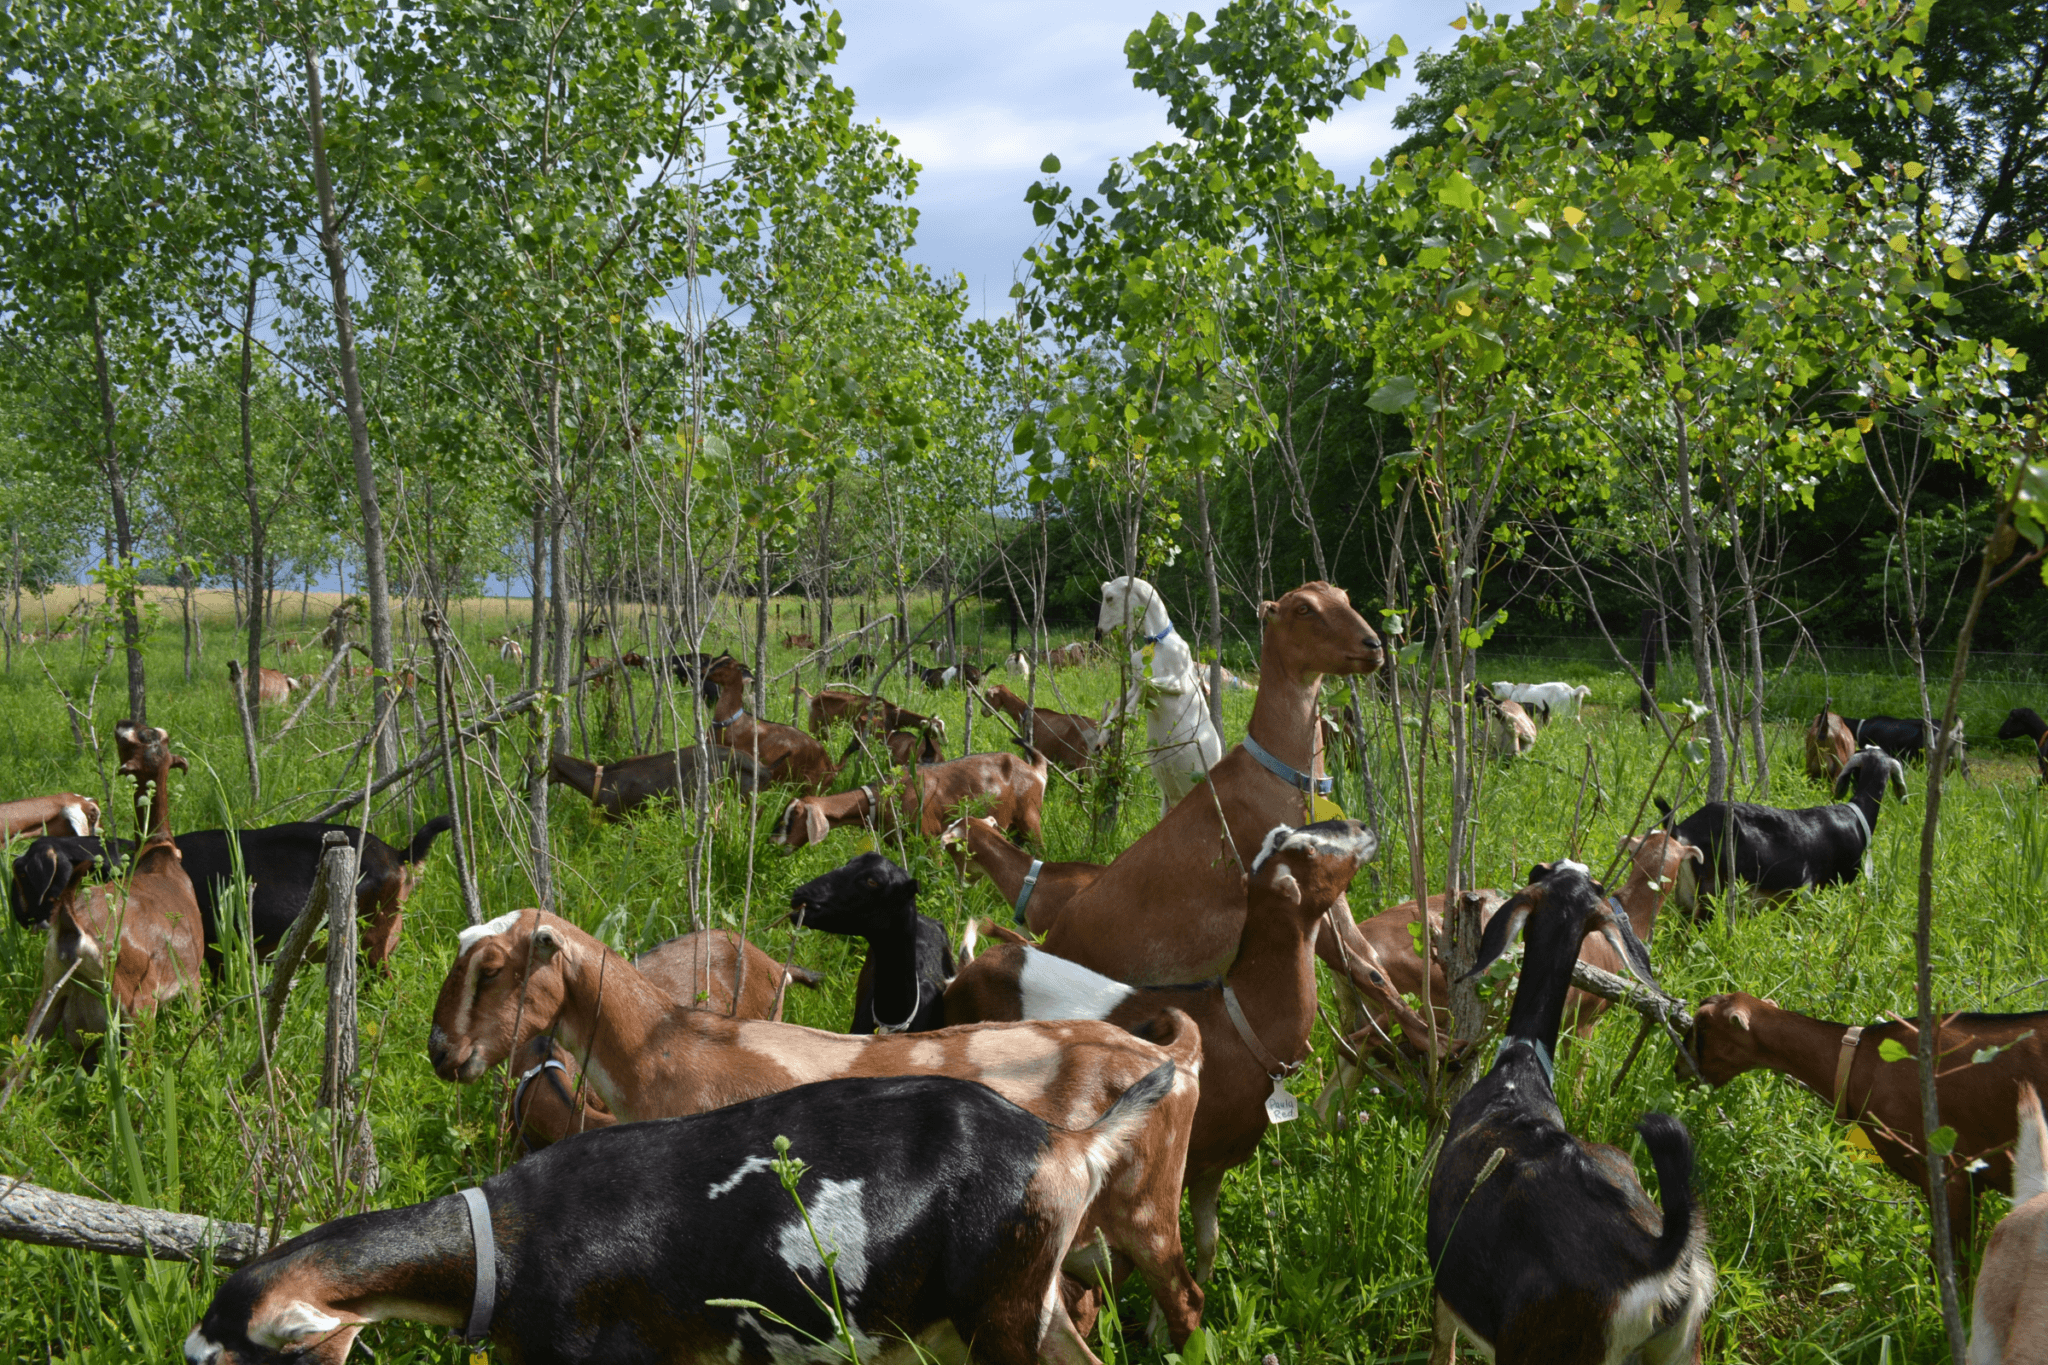 Farm co-owner Wes Jarrell is experimenting with silvopasture to protect his goats from heat stress.